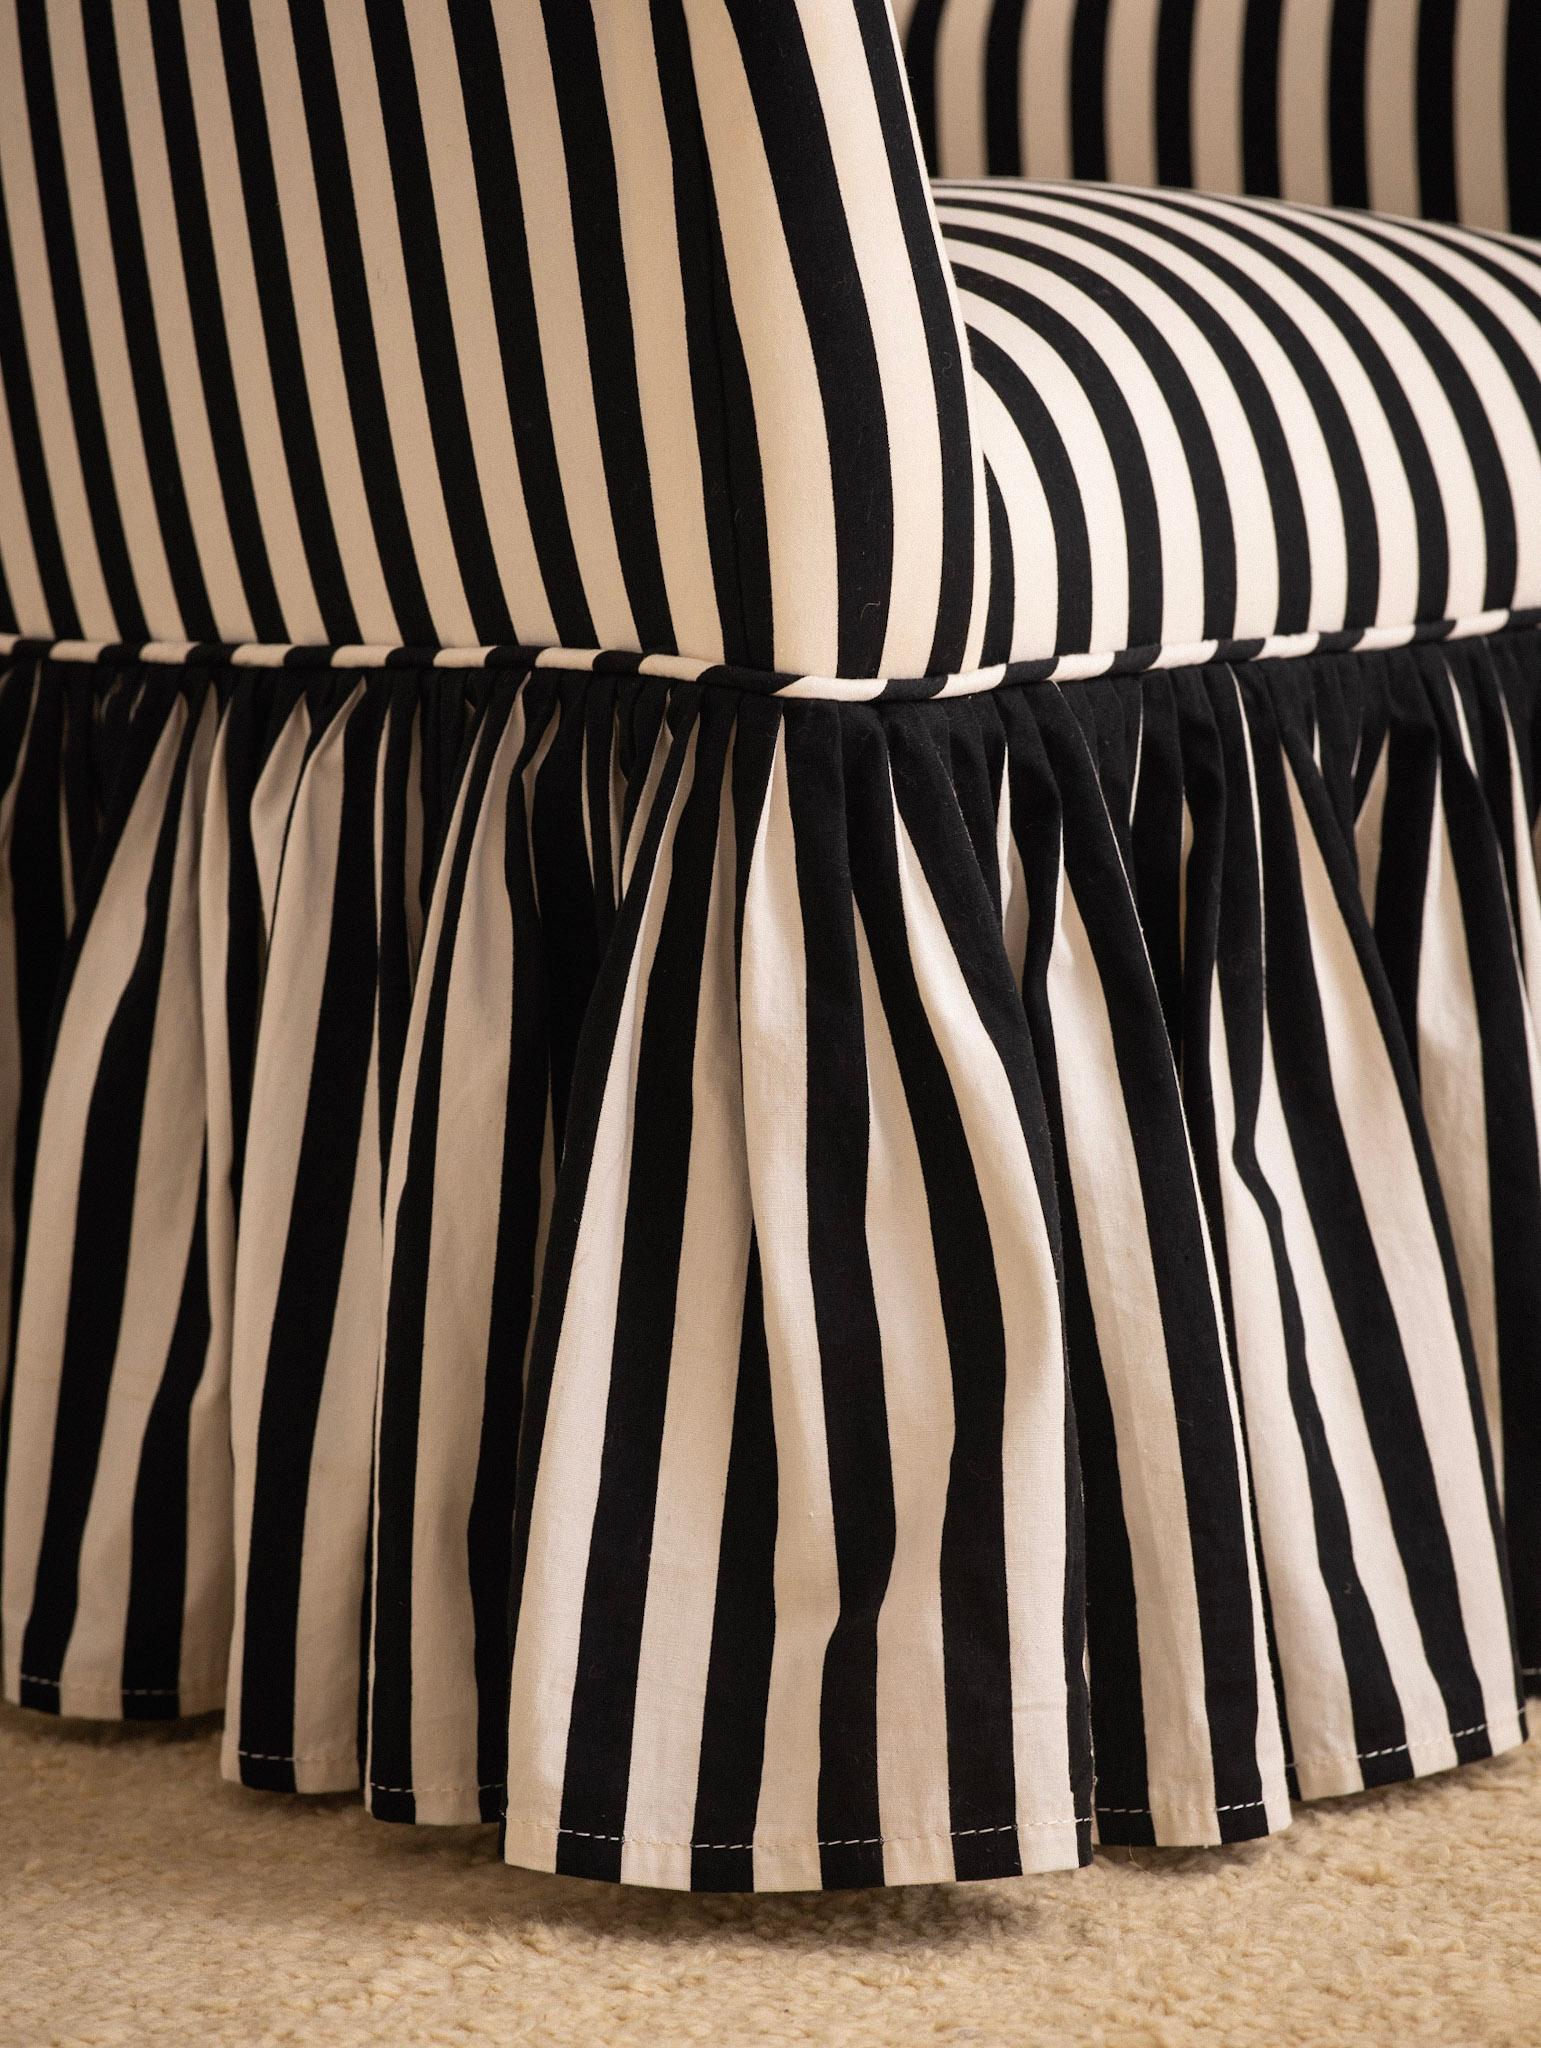 Mid Century Accent Chair in Black and White Stripe with Ruffle Skirt 2